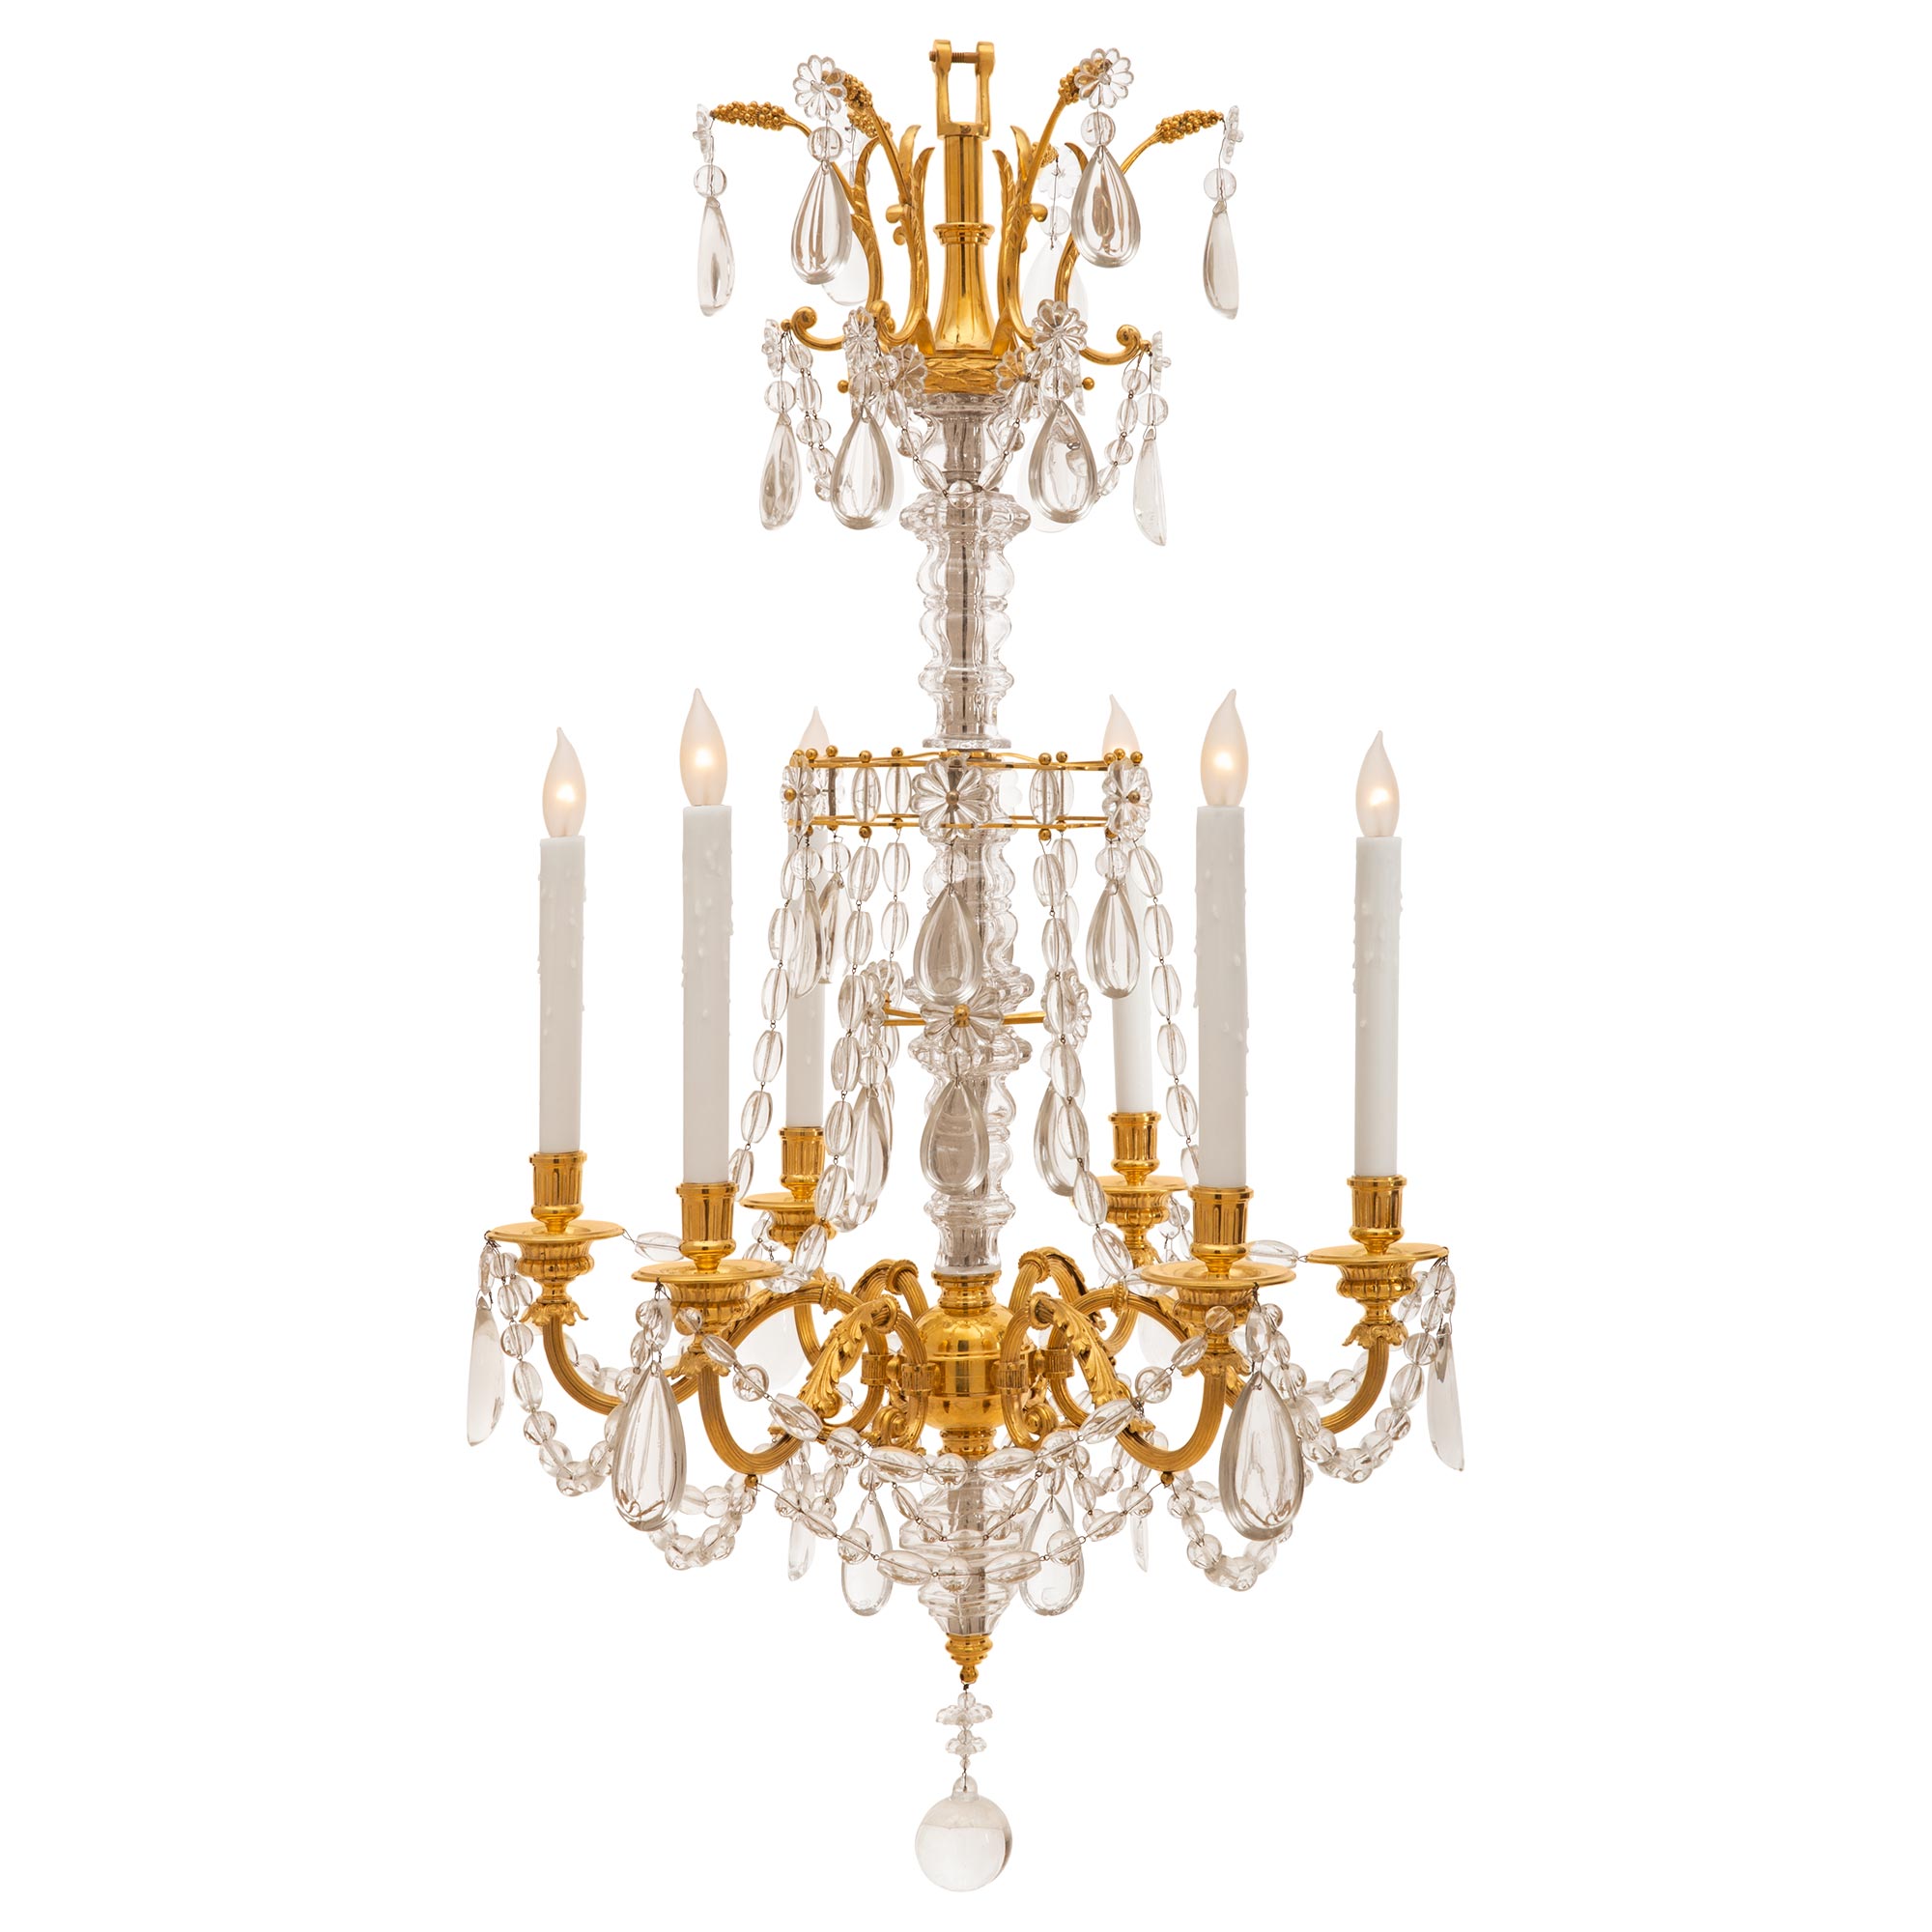 French Mid-19th Century Louis XVI Style Marie Antoinette Crystal Chandelier For Sale